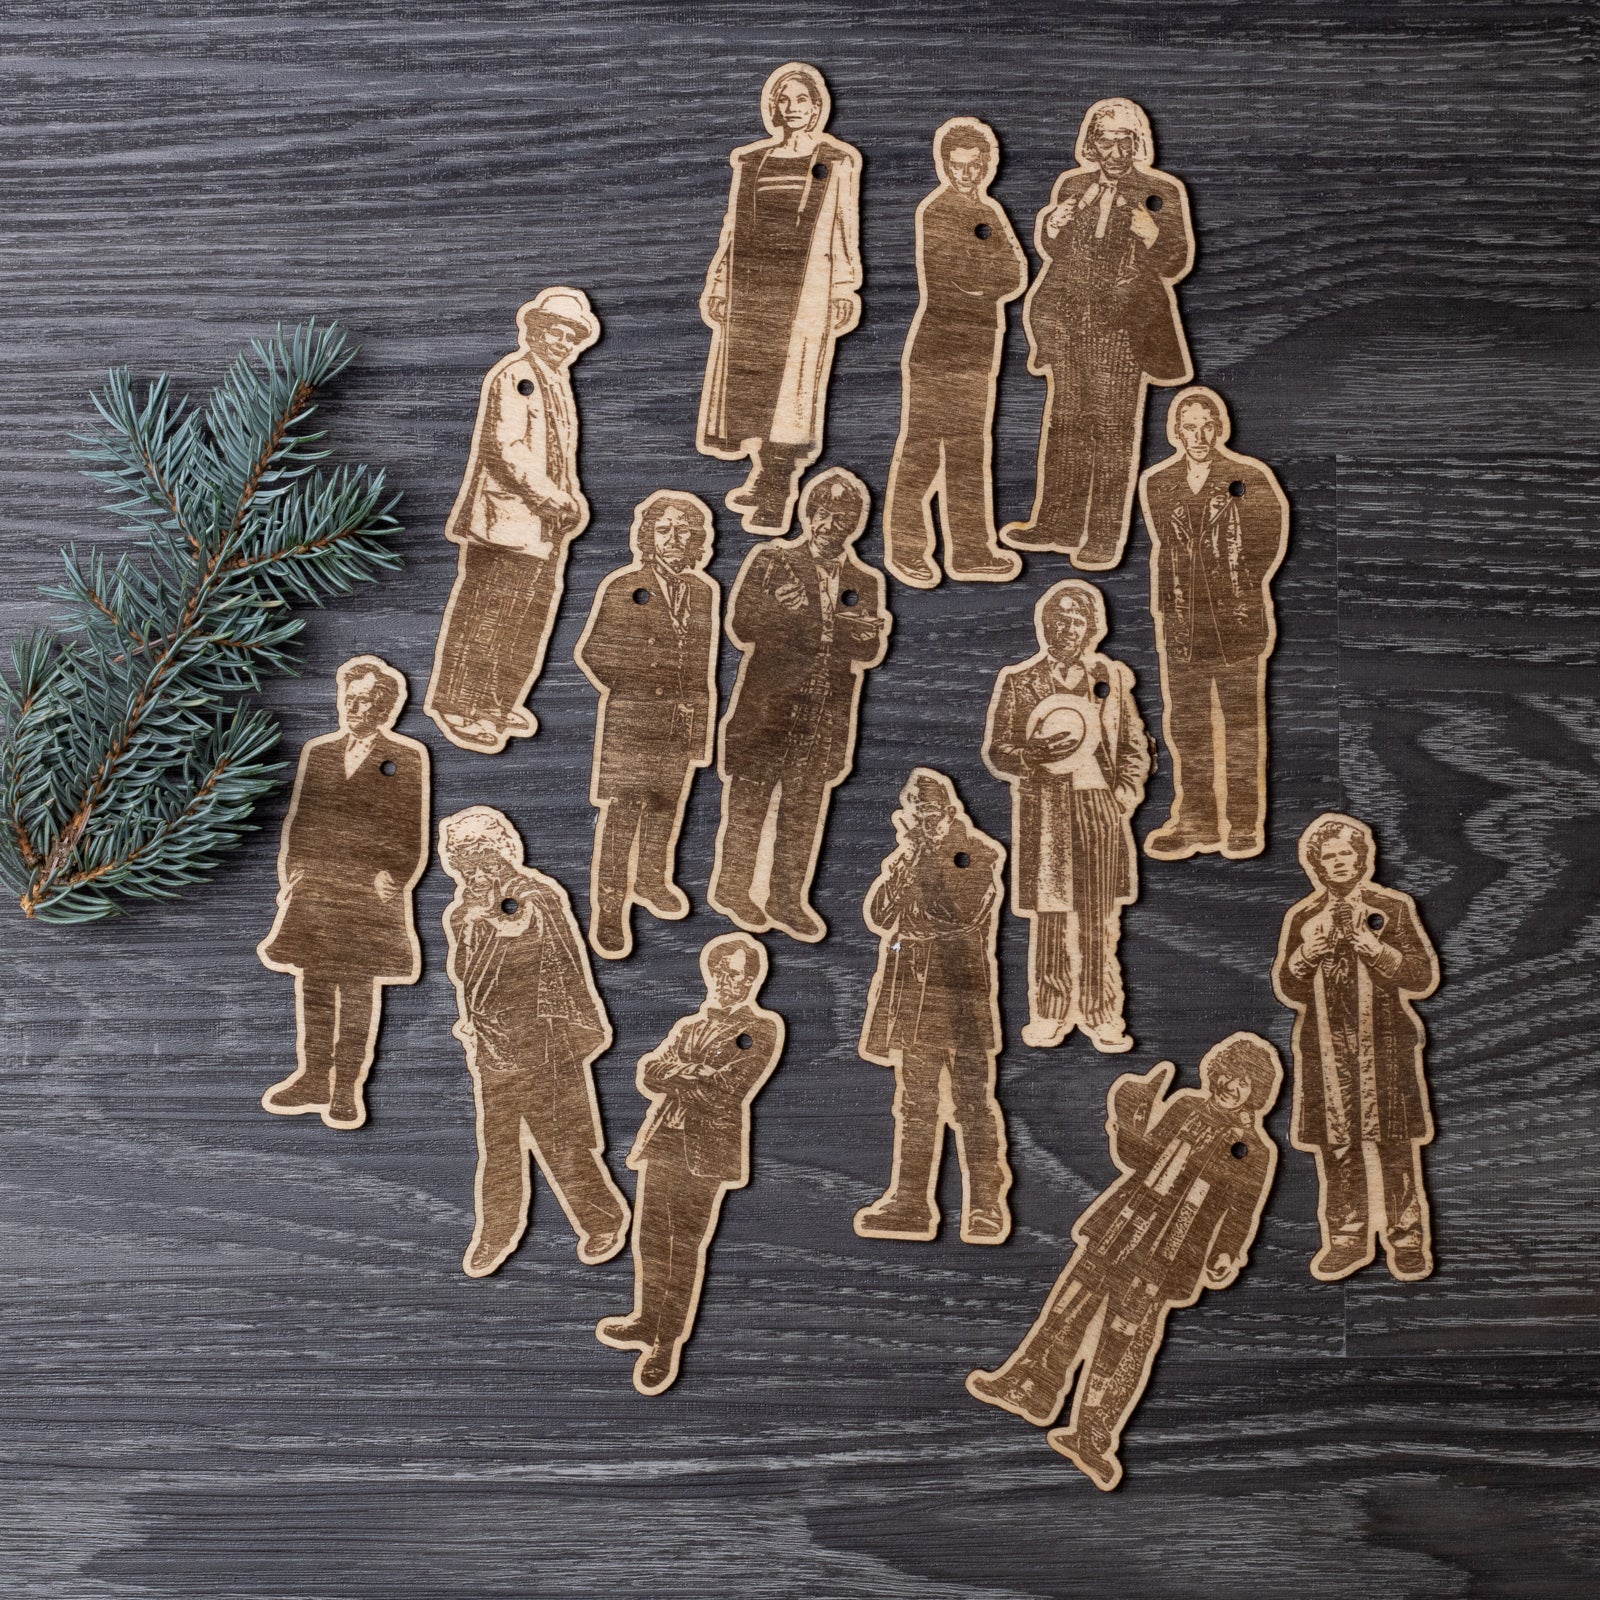 The Doctors Collection Wood Ornaments/Keychains